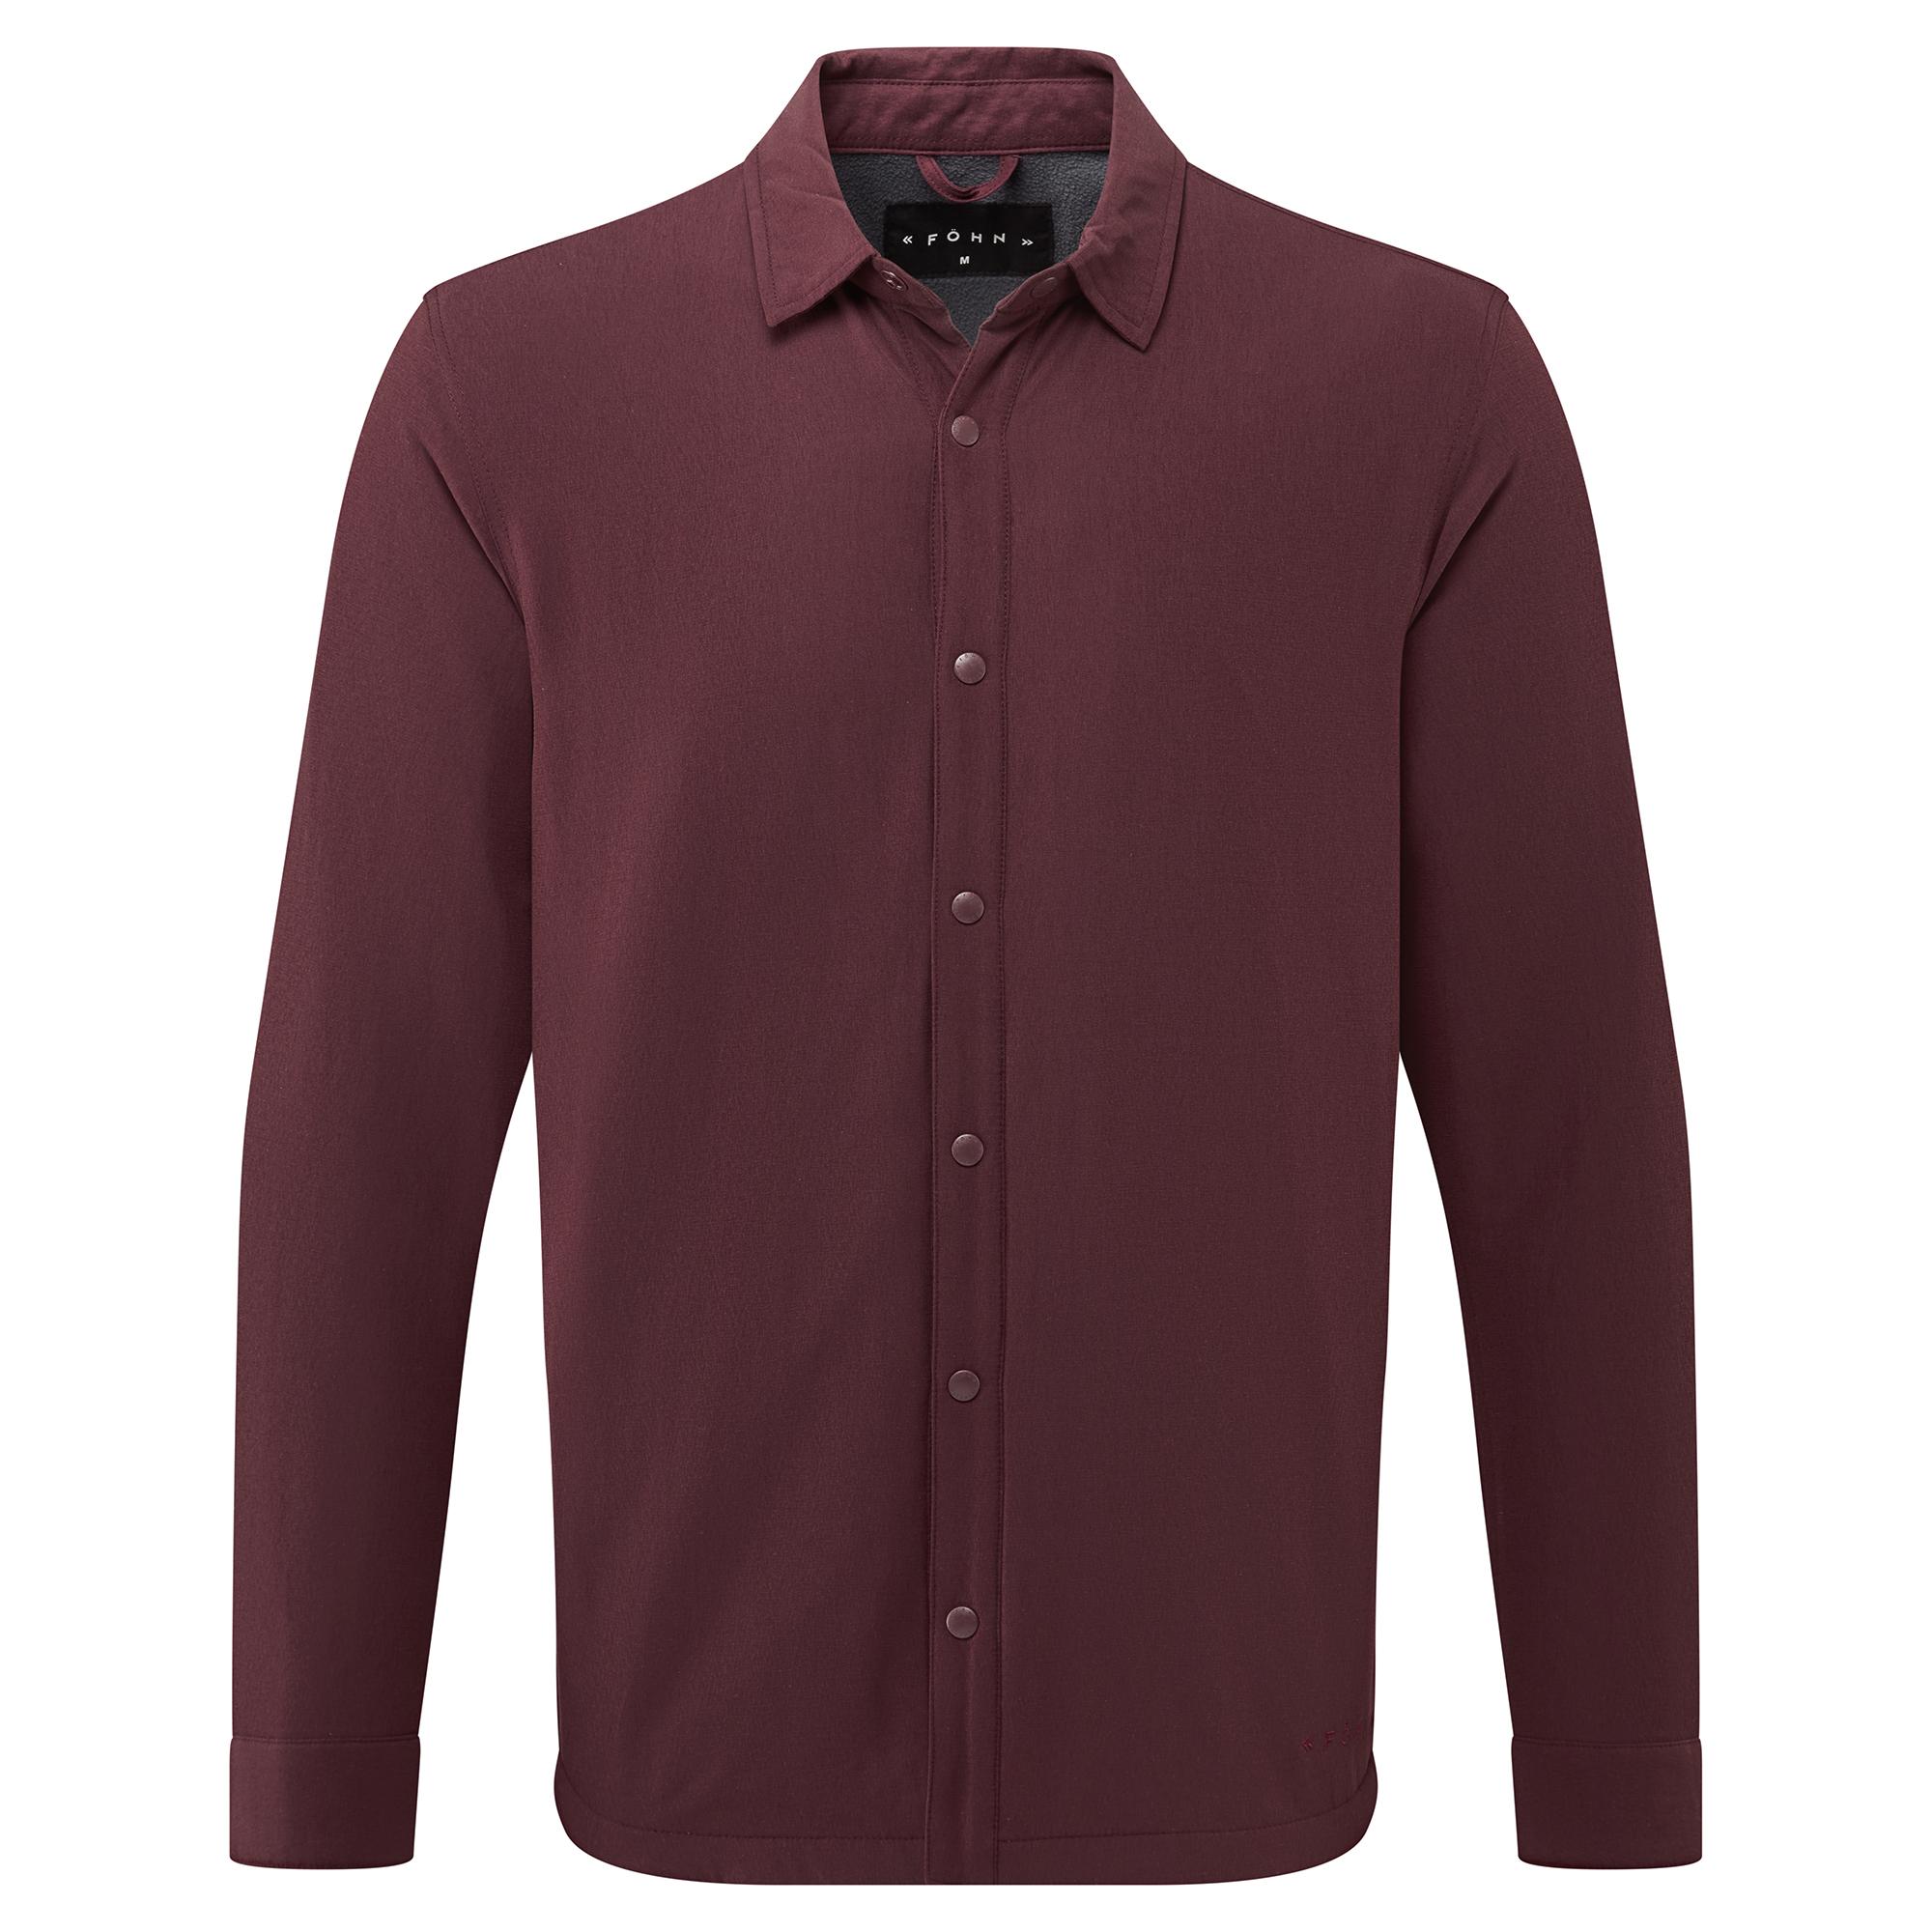 Fhn Mens Insulated Shirt  Port Royale